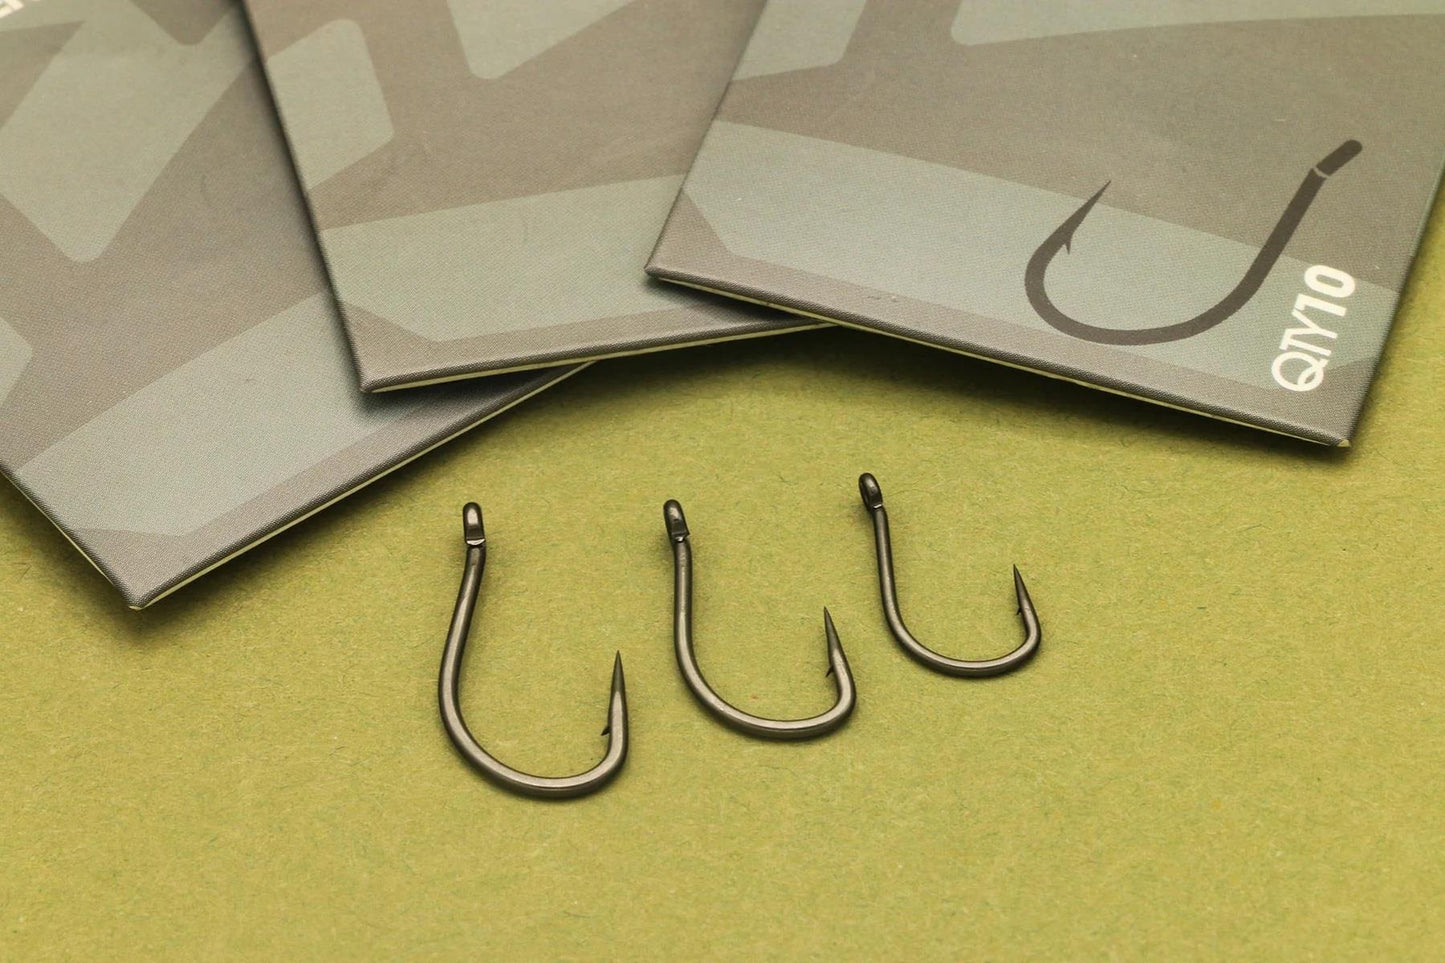 One More Cast OMC Redesmere Surrender Chod Hooks